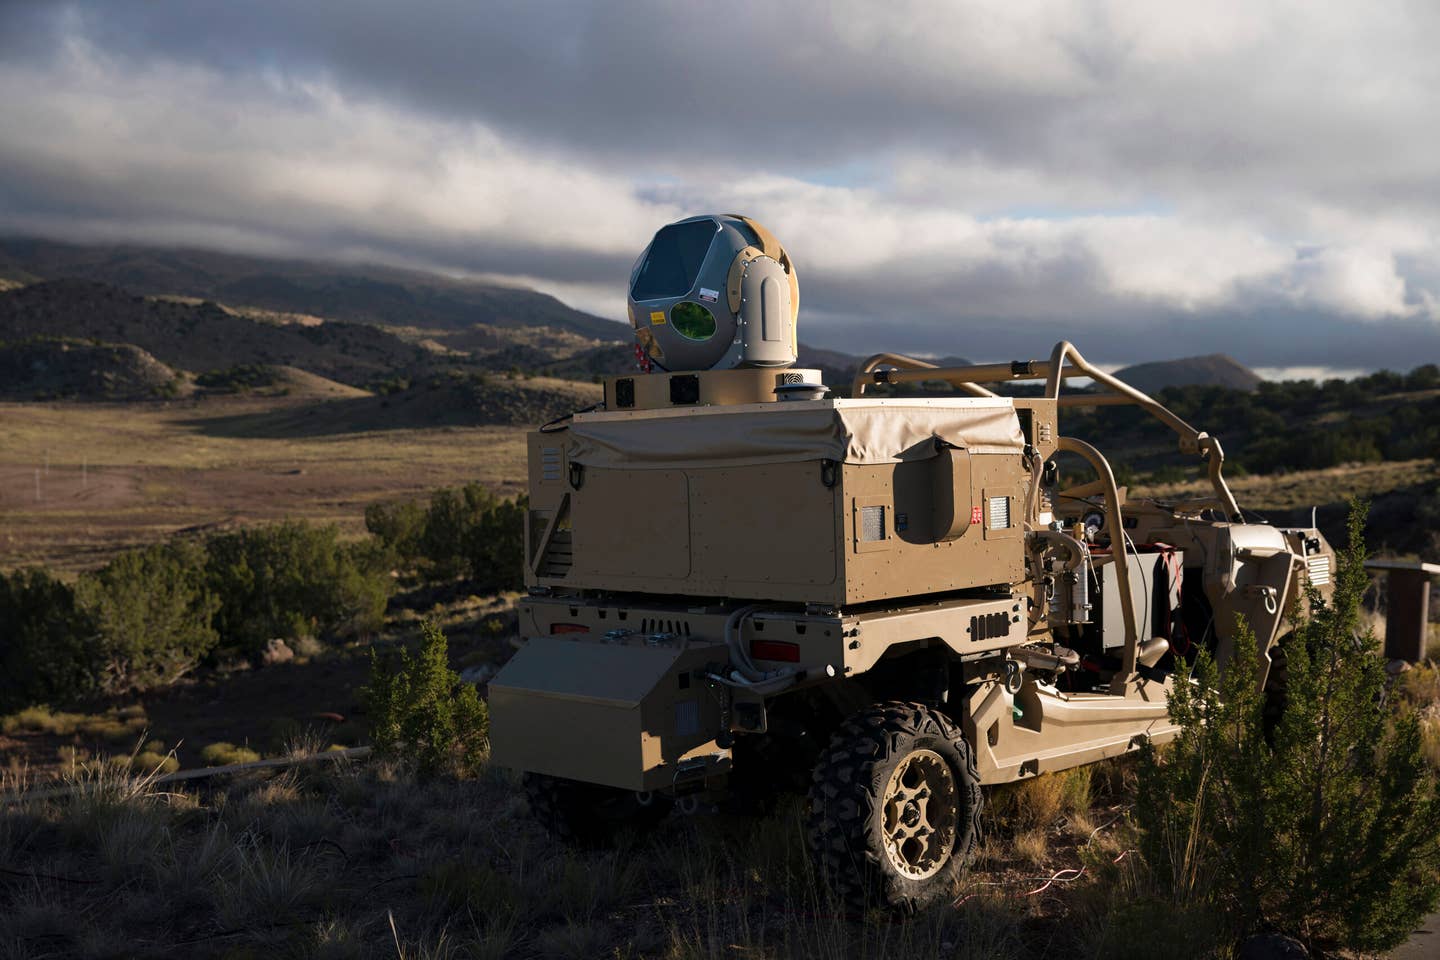 Mobile c-UAS laser-guided rocket systems